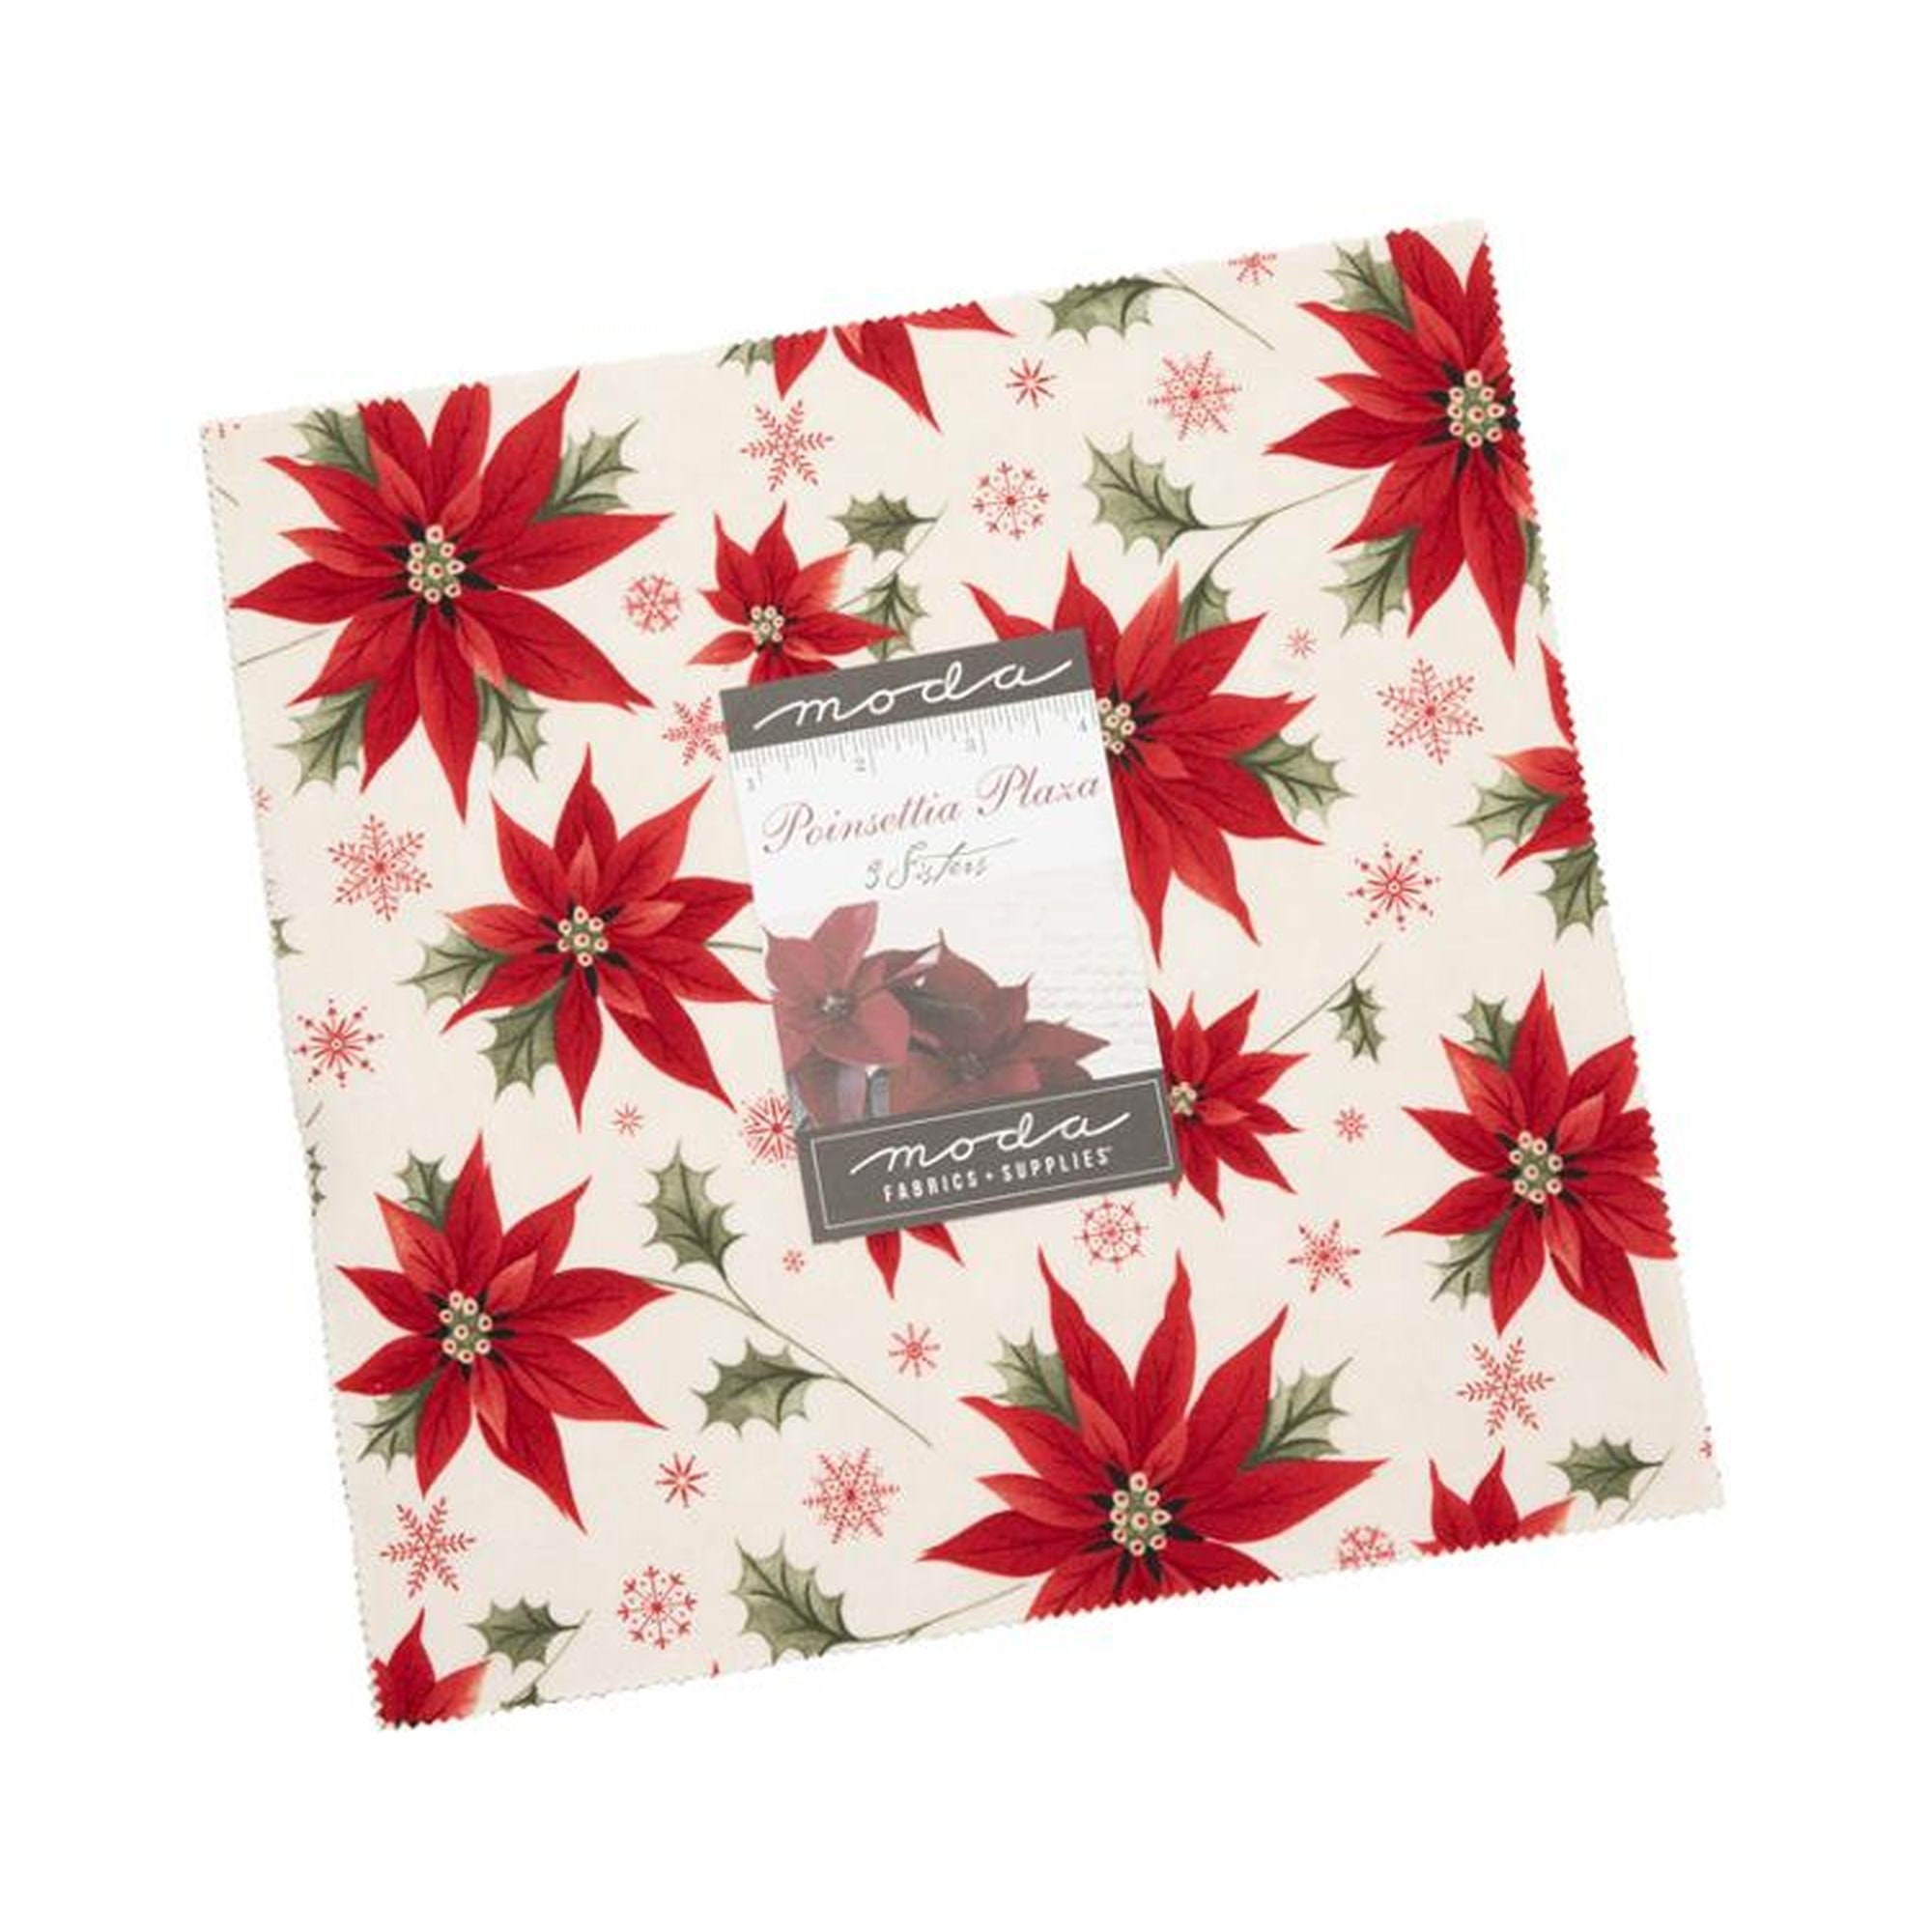 Stained Glass Packed Poinsettia Christmas on Black Quilt Cotton Fabric By  The Yard - Merchlet